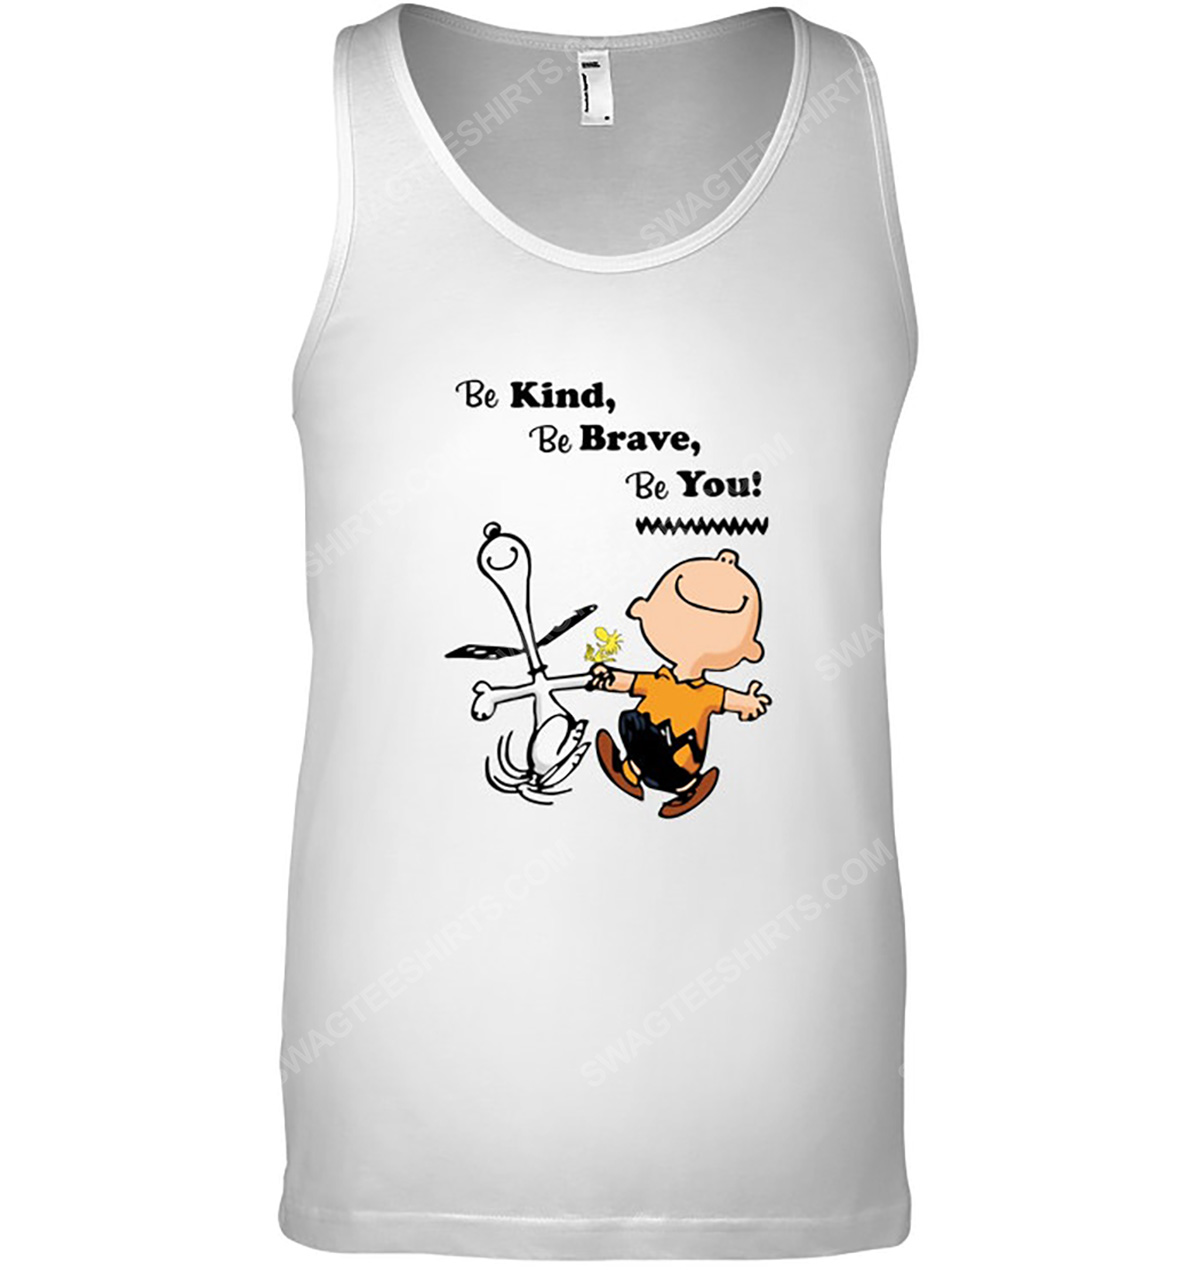 Charlie brown and snoopy be kind be brave be you tank top 1